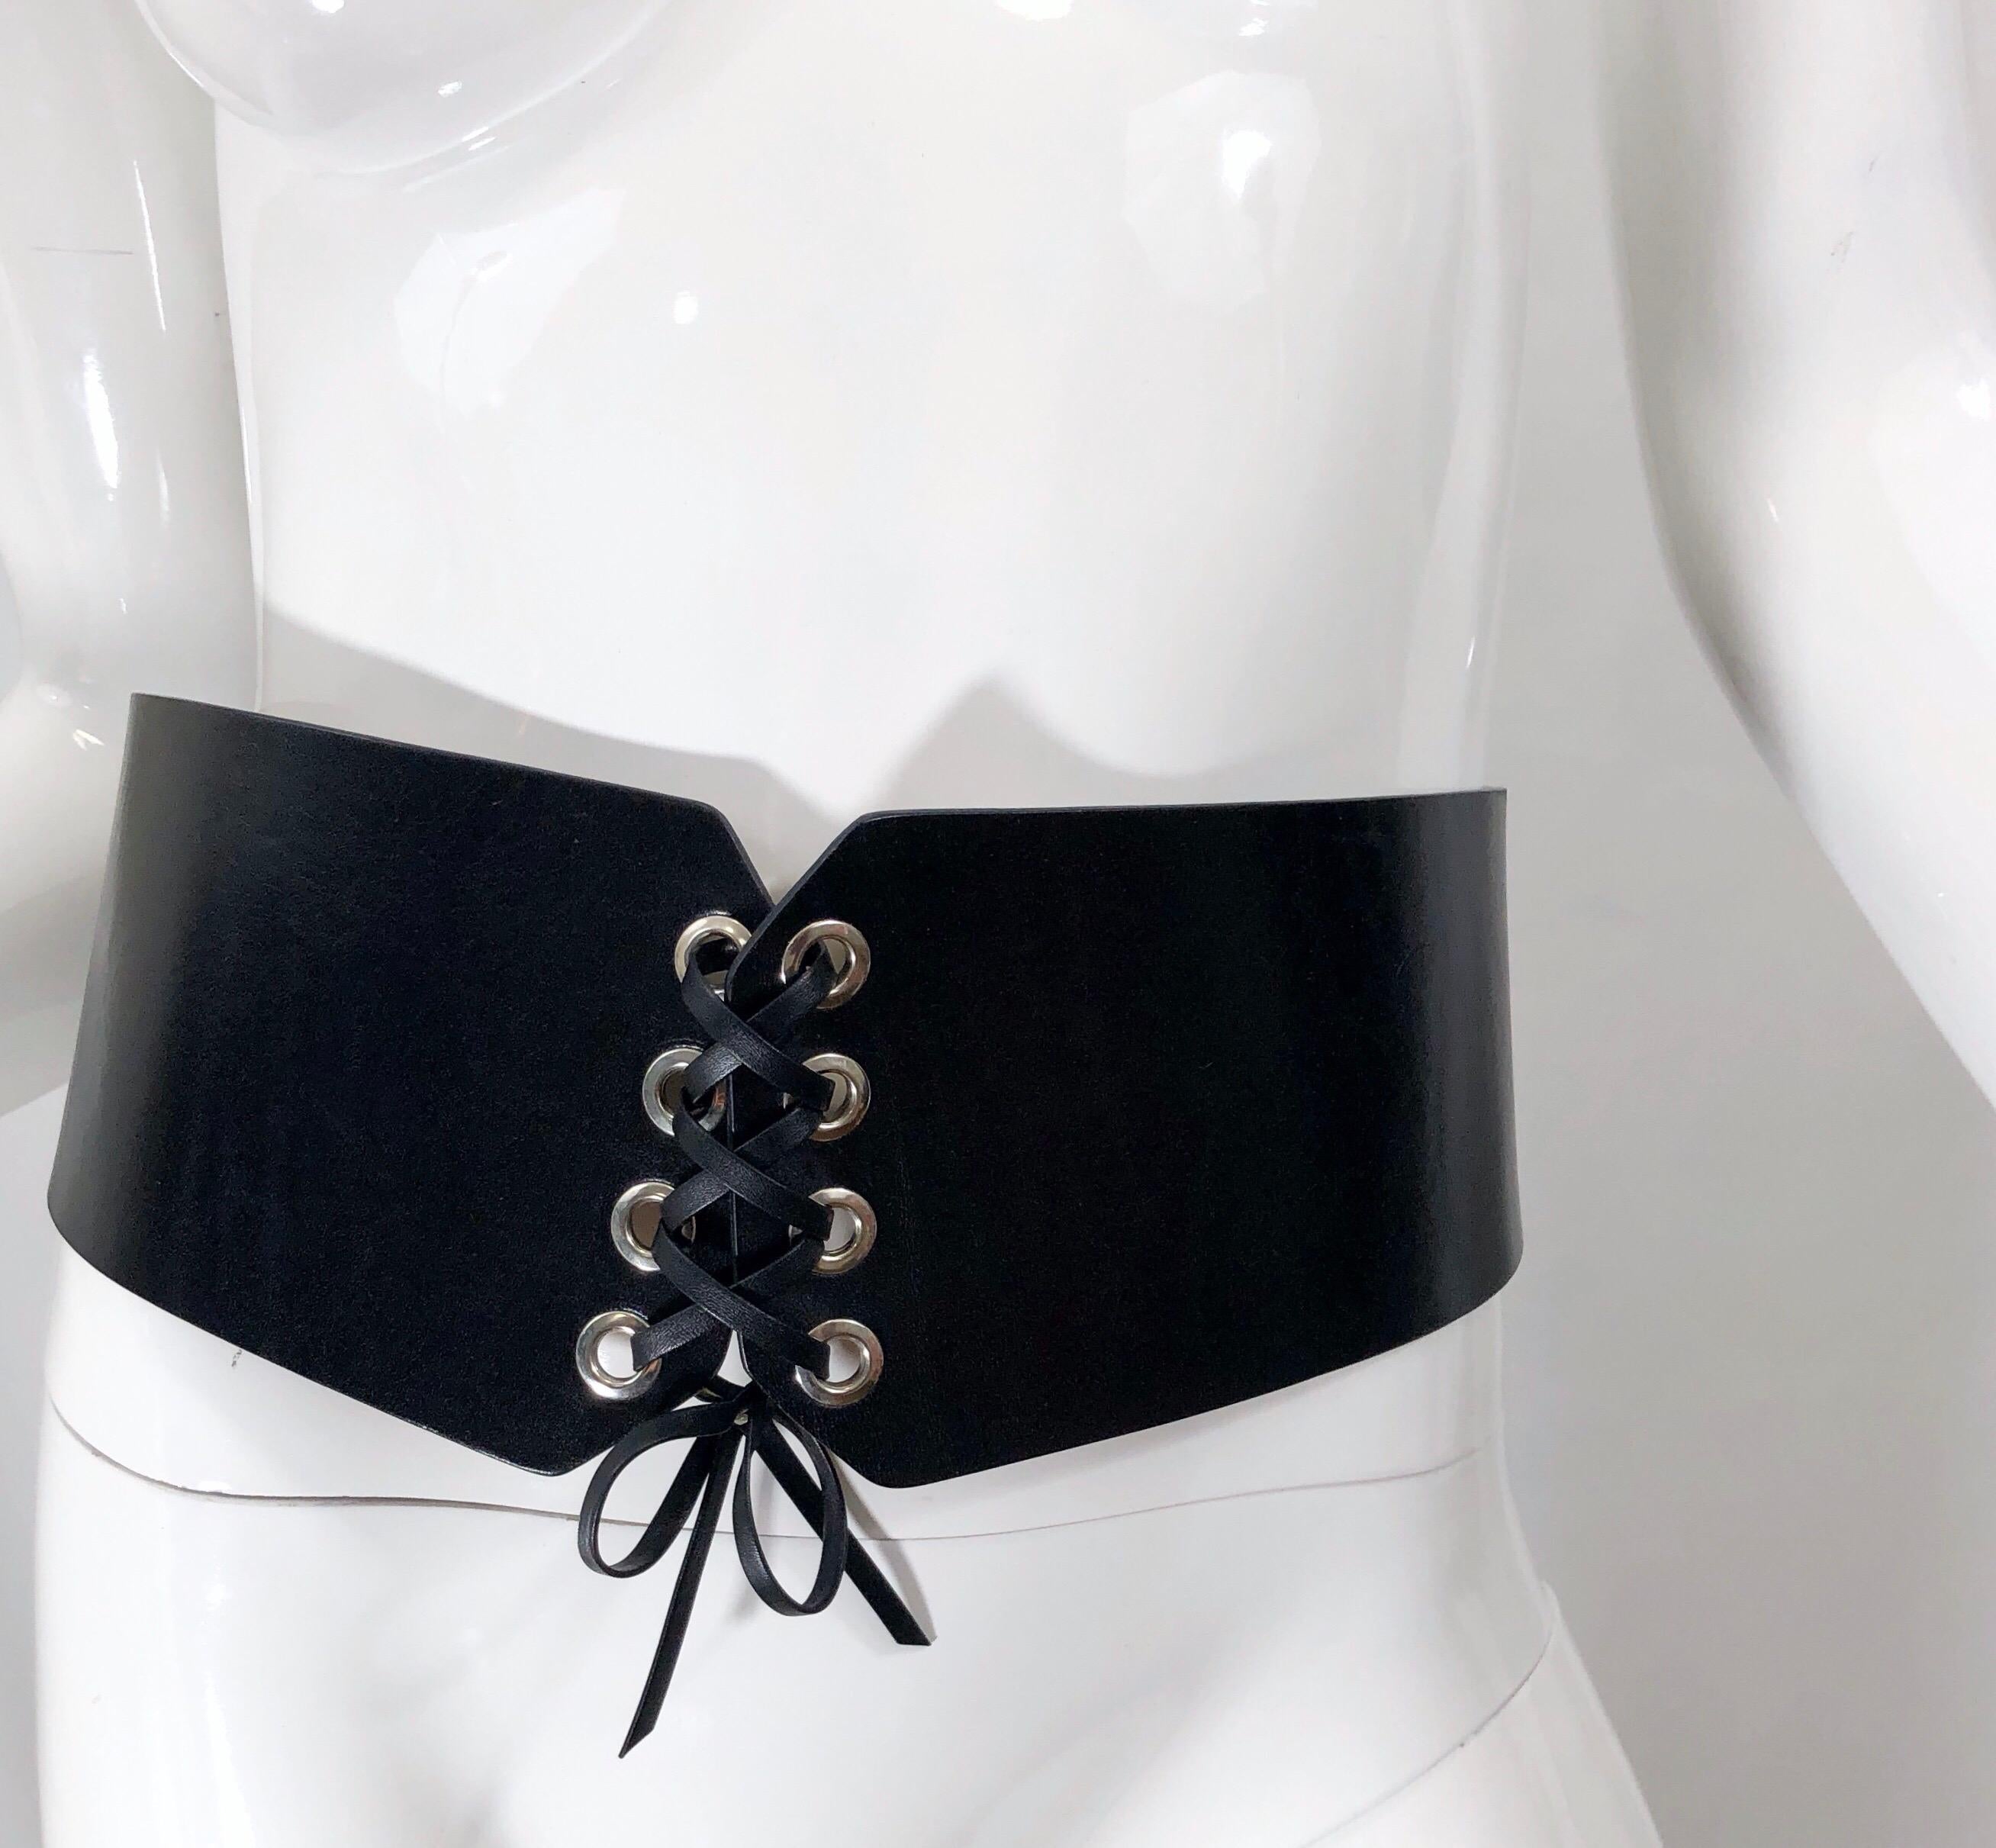 NWT Michael Kors Collection Size Large Black Leather Corset Style Waist Belt 2